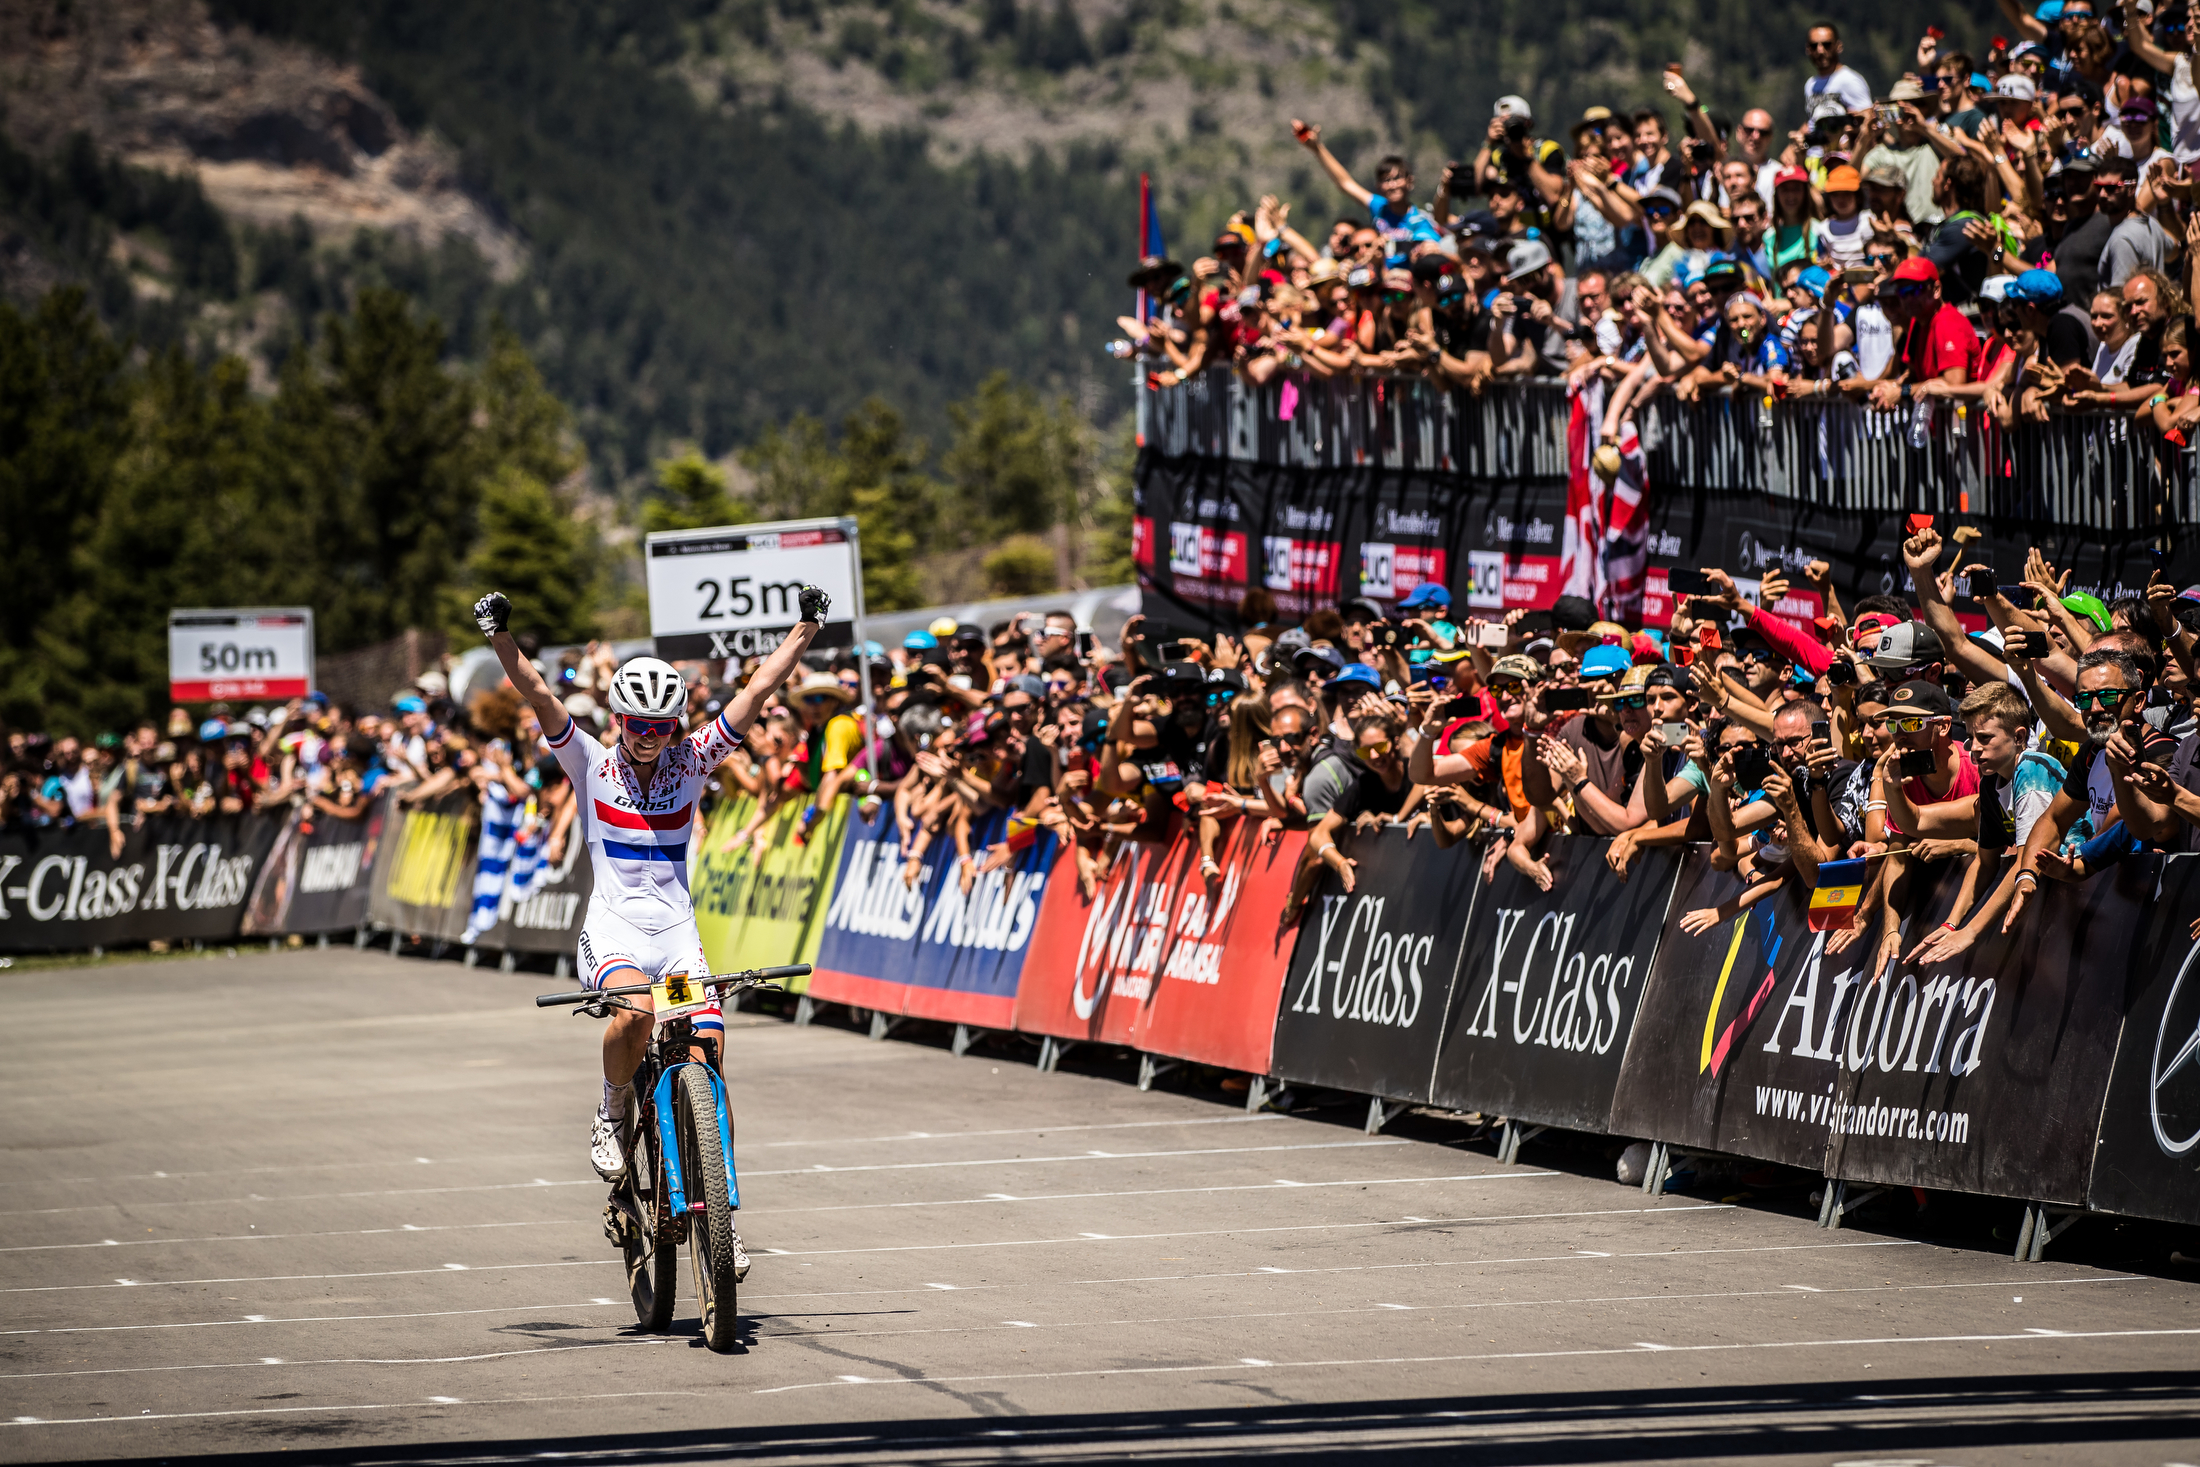 Anne Terpstra rides across the finish line, with fists in the air.